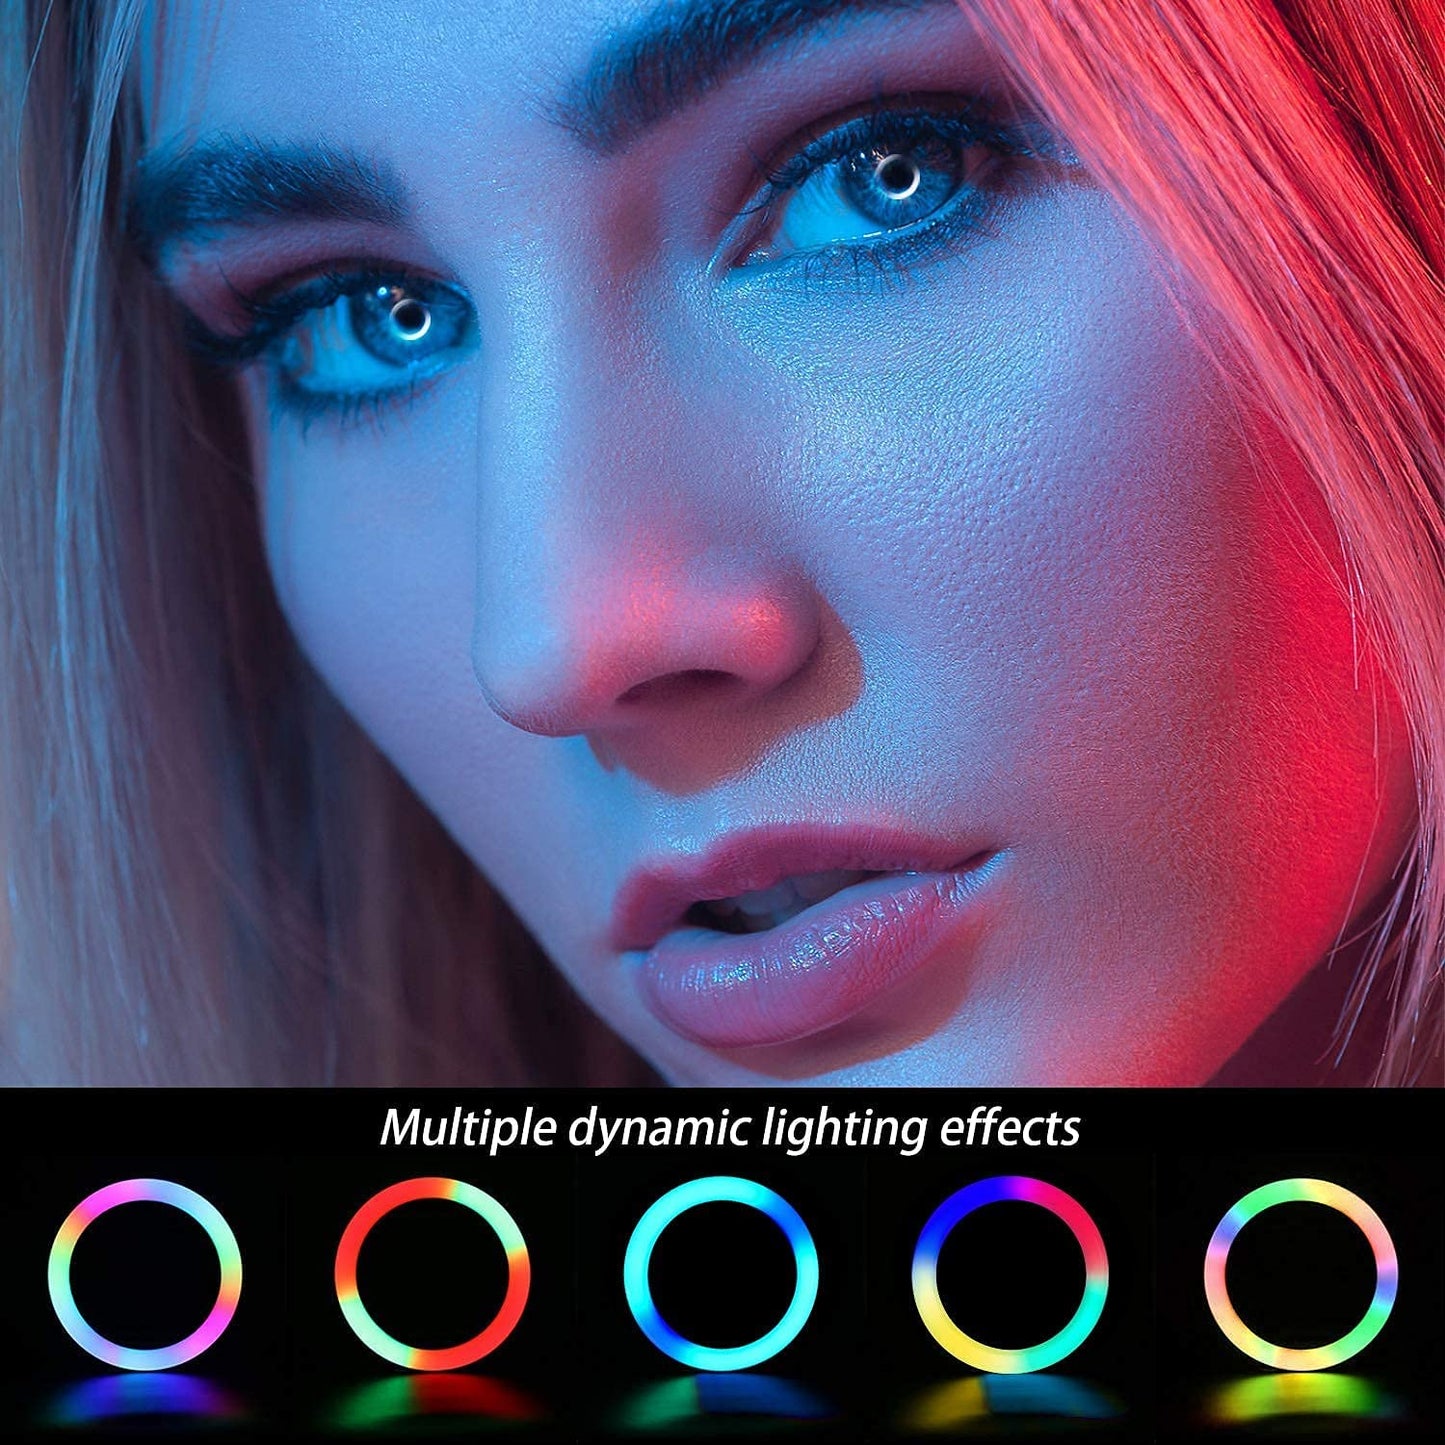 10" RGB Ring Light with 63" Tripod Stand, Dimmable USB LED Ring Light for Selfie, Makeup, Live Streaming, YouTube, TikTok, Photography